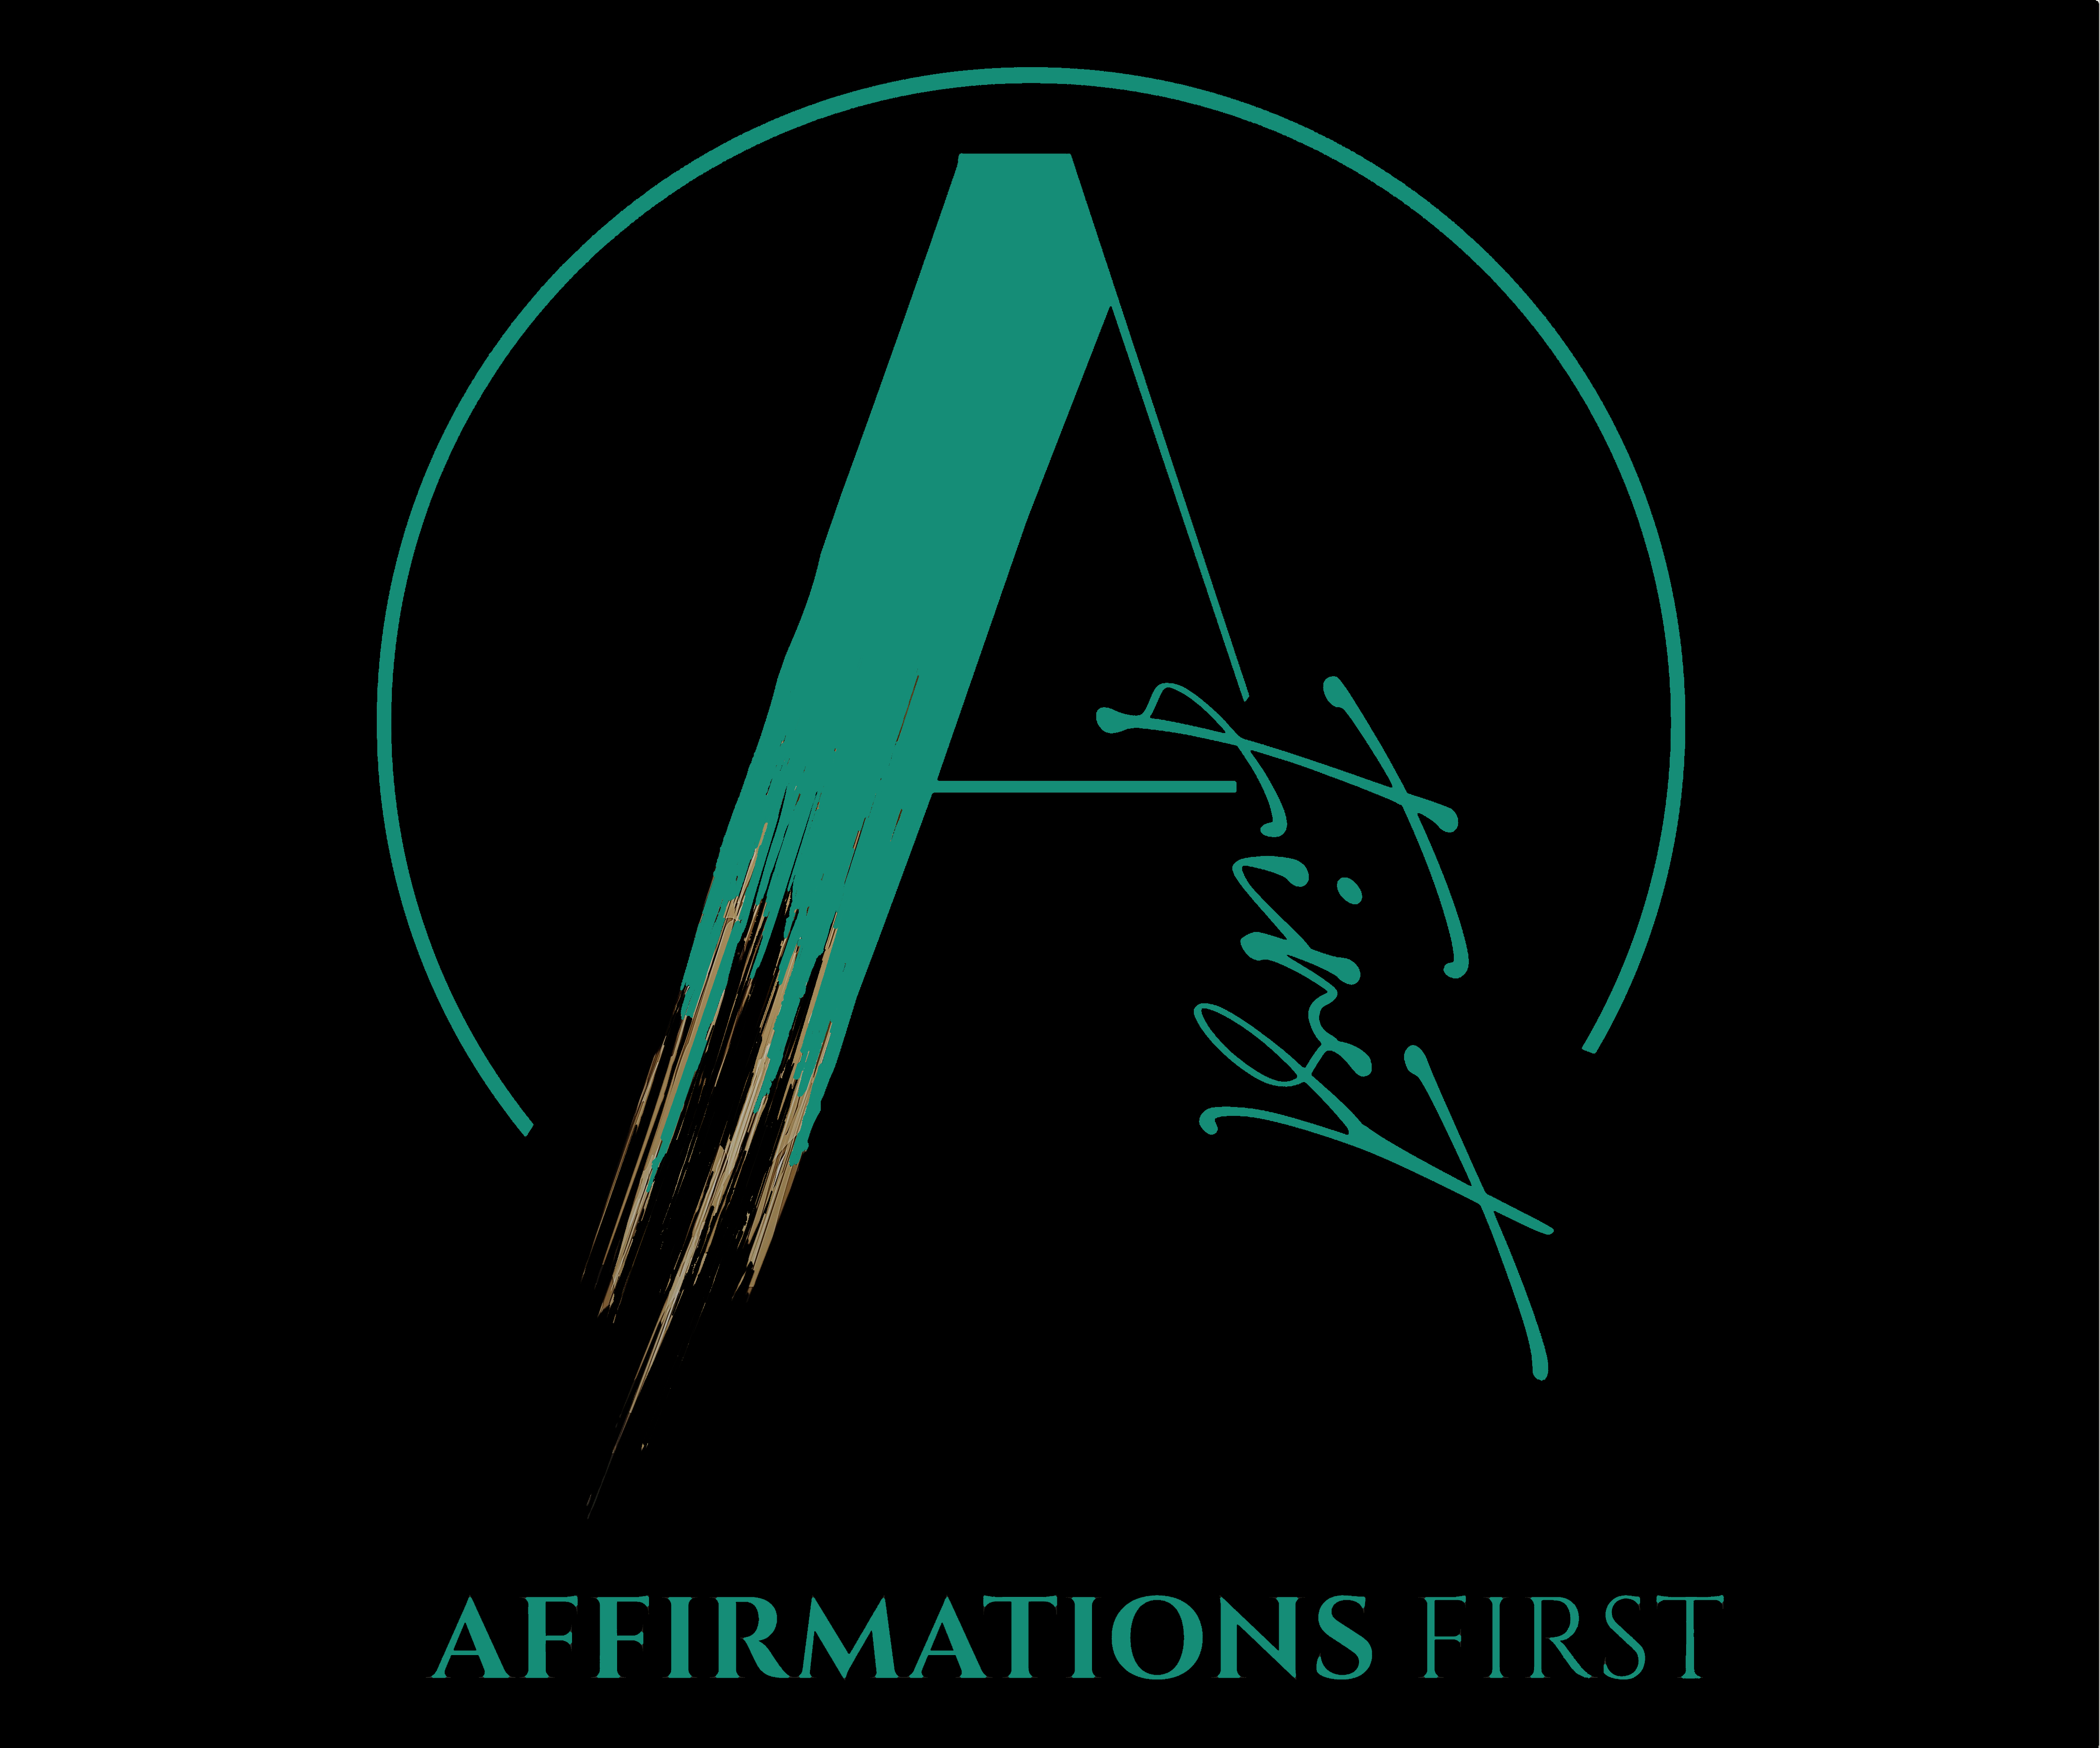 WELCOME TO THE BRAND OF "AFFIRMATIONS FIRST"